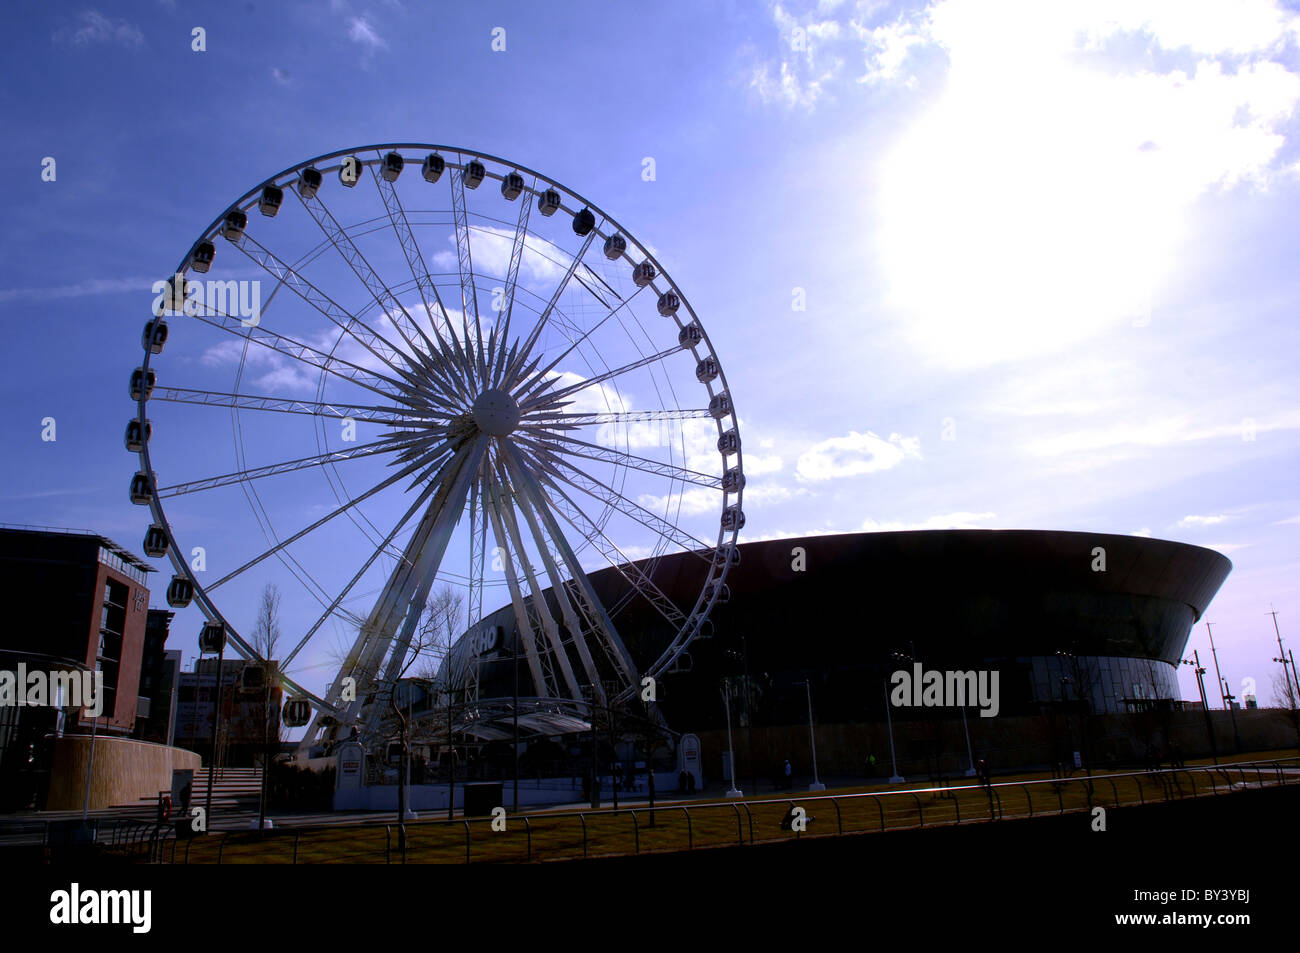 The Wheel of Liverpool by the Liverpool Echo Arena. Stock Photo